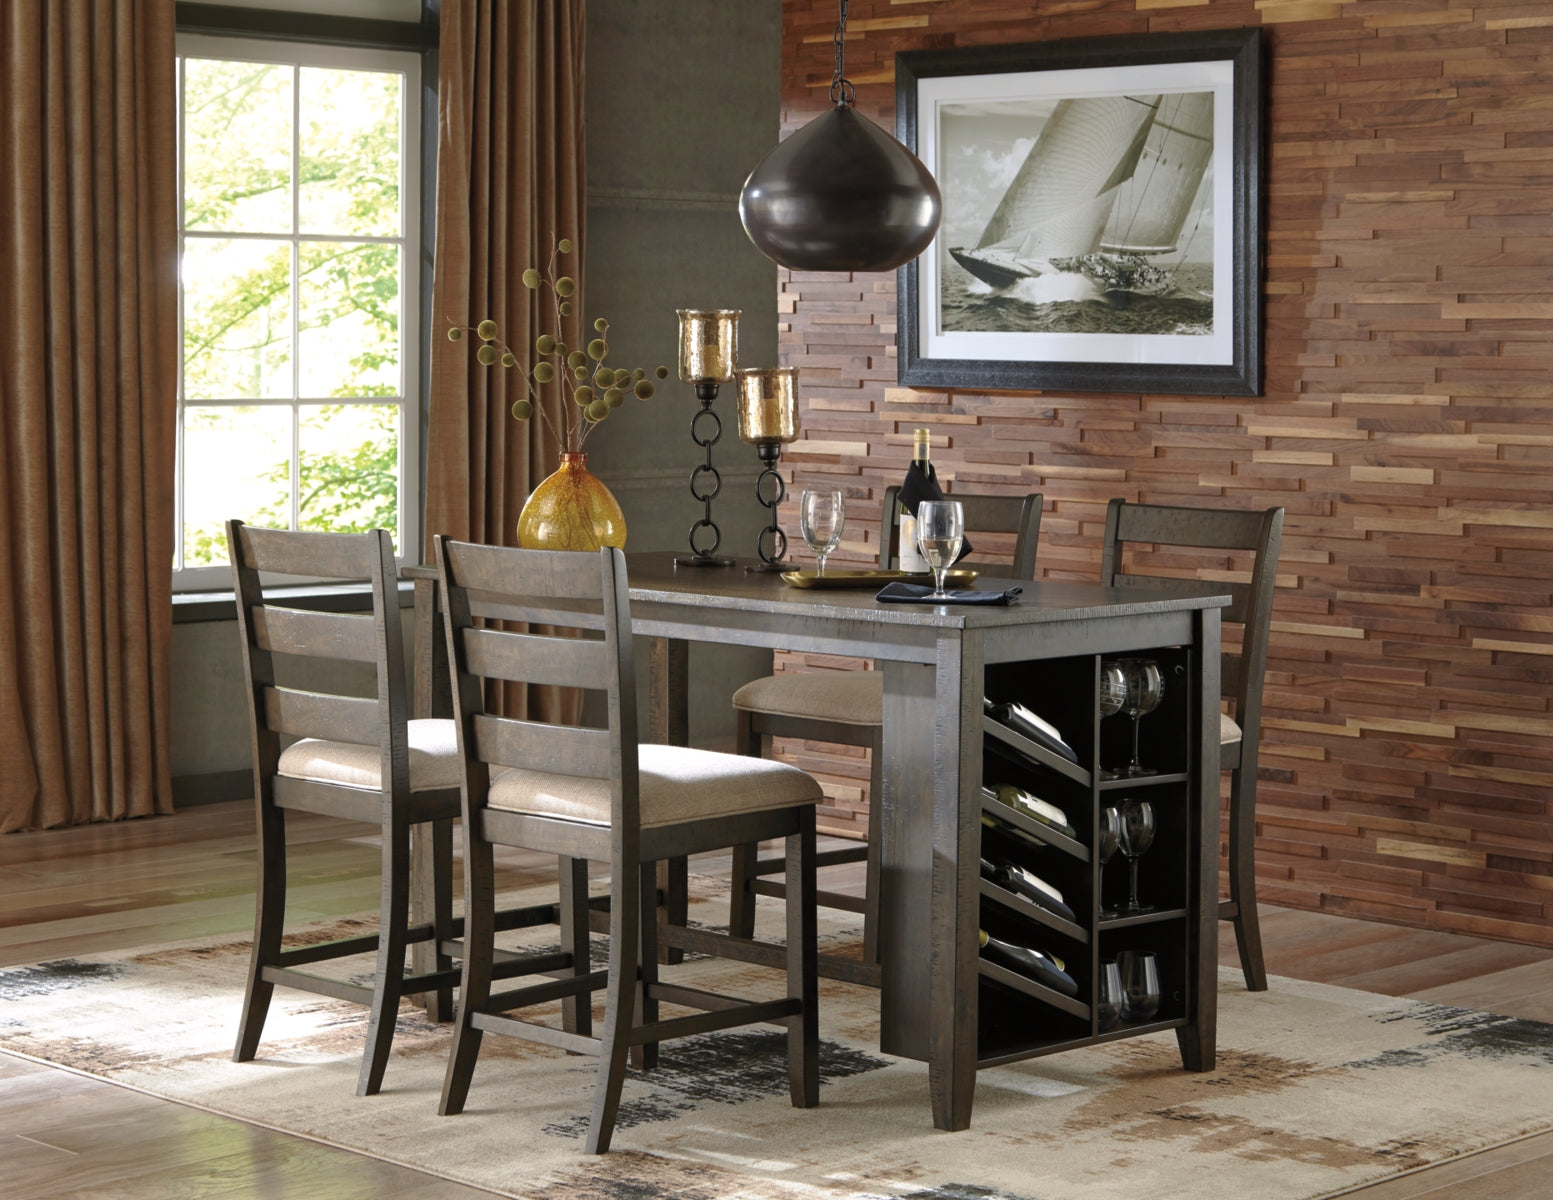 Rokane Counter Height Dining Table and 4 Barstools